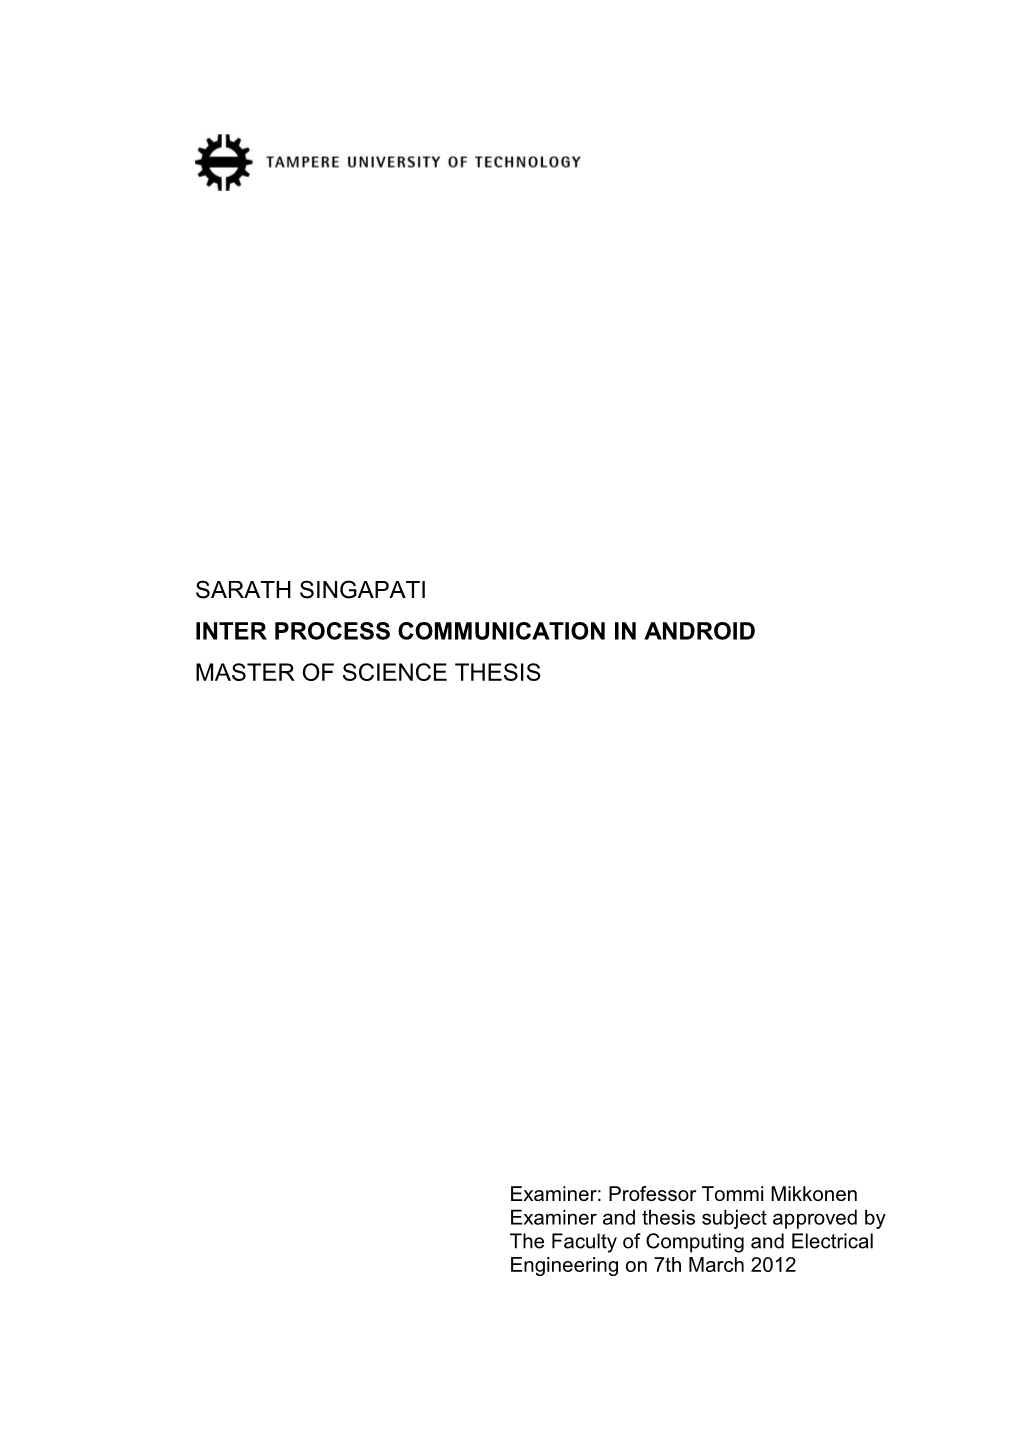 Sarath Singapati Inter Process Communication in Android Master of Science Thesis